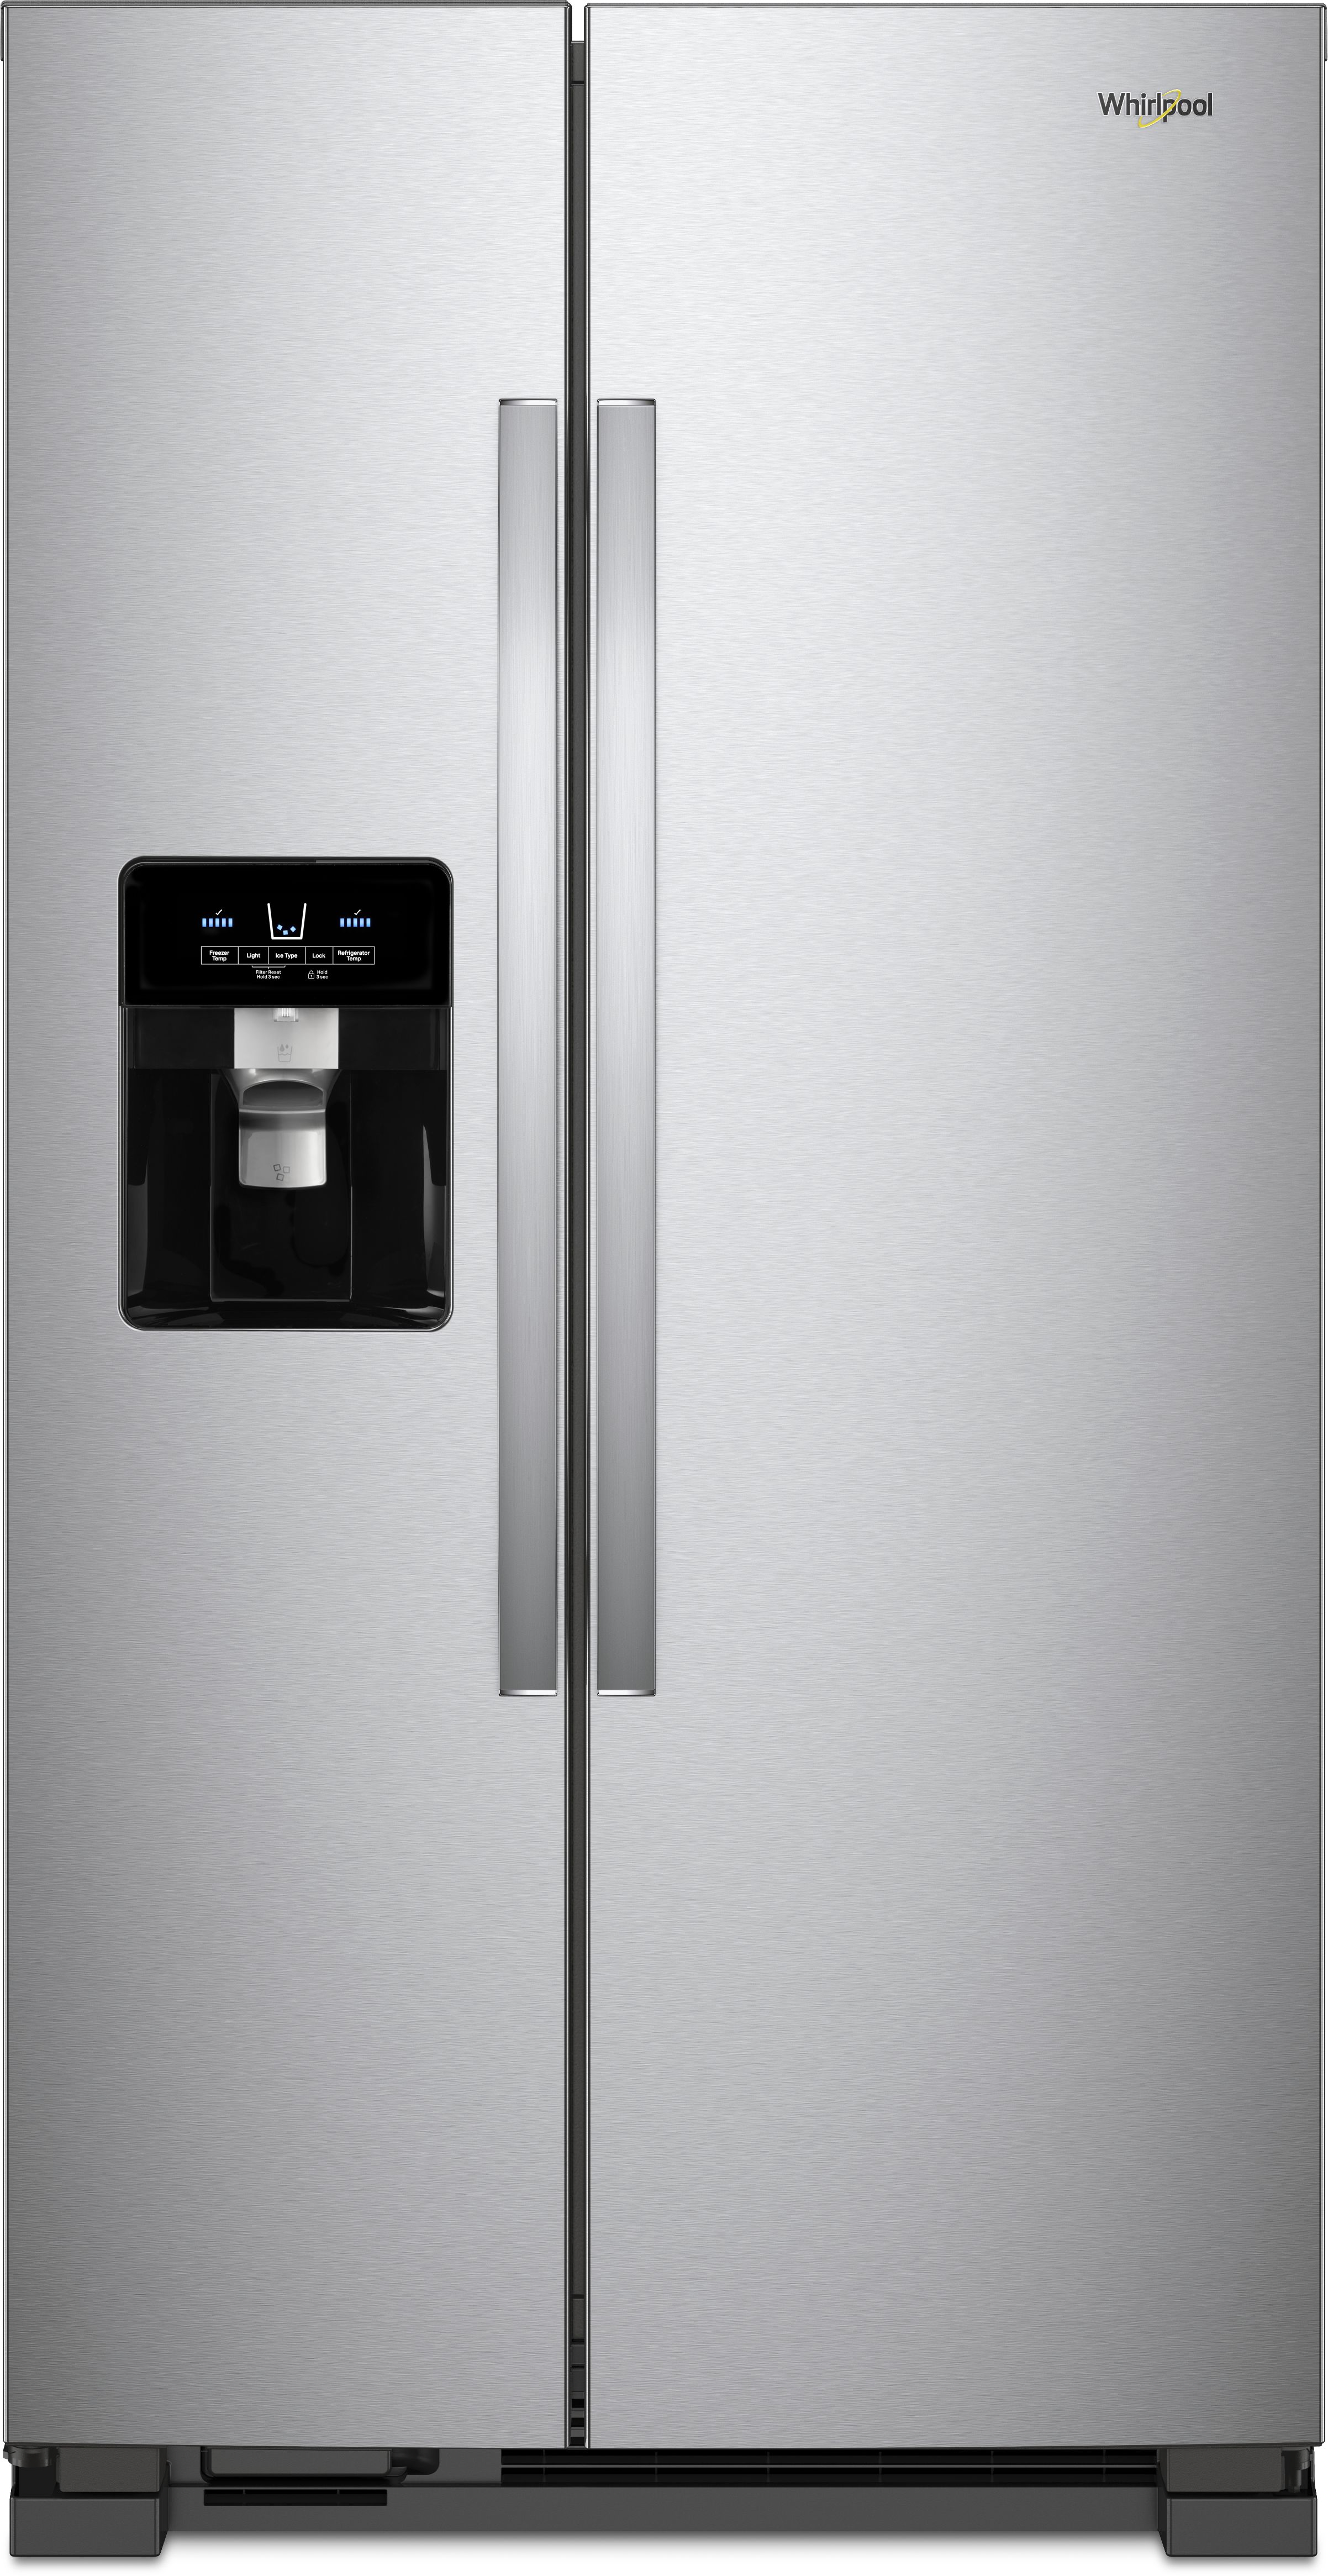 Whirlpool® 24.5 Cu. Ft. Monochromatic Stainless Steel Side-By-Side Refrigerator-WRS335SDHM